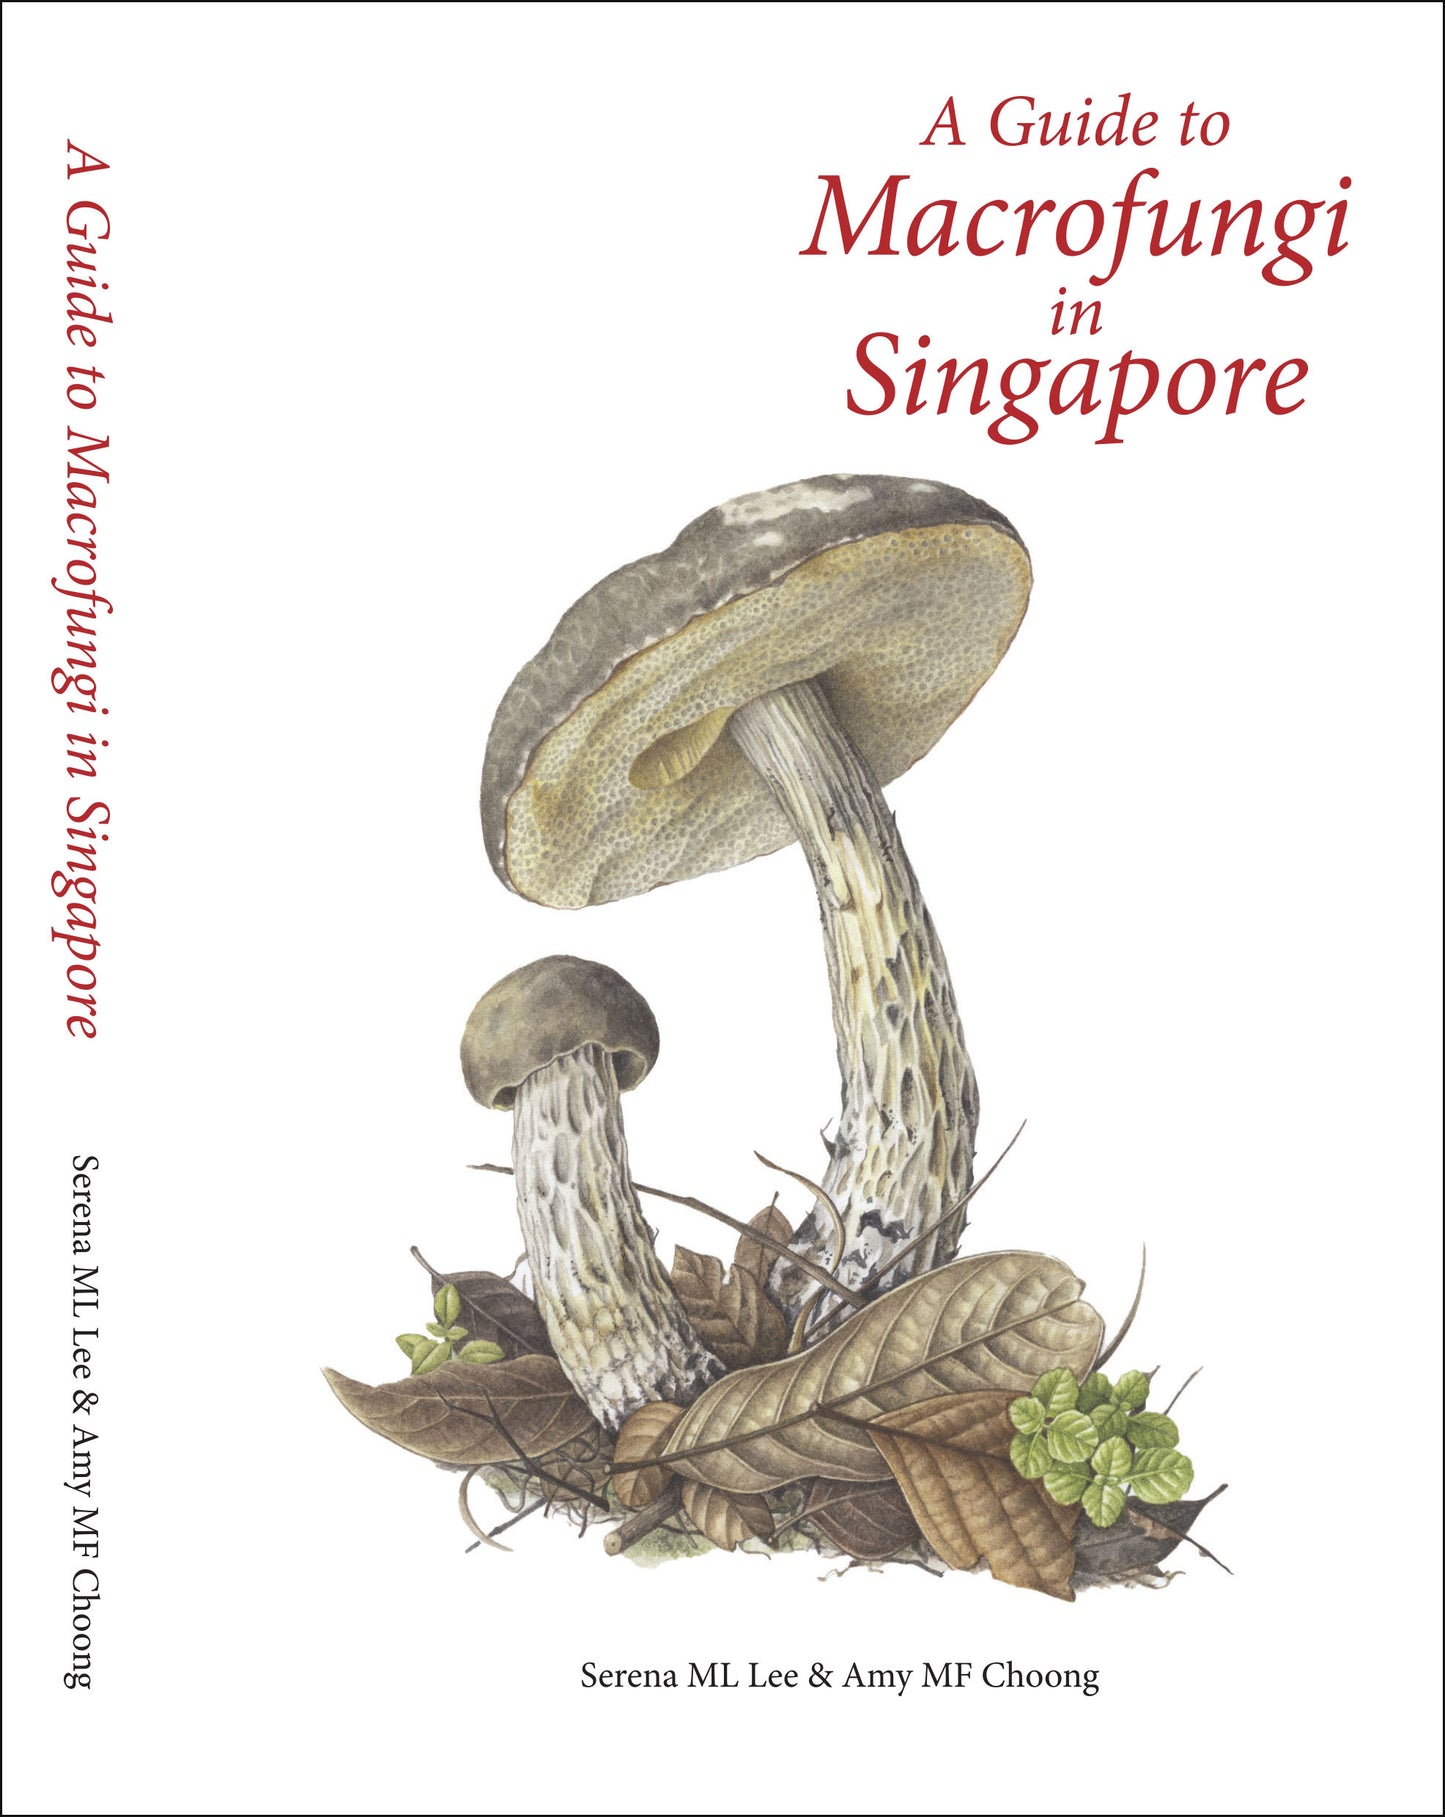 A Guide to Macrofungi in Singapore